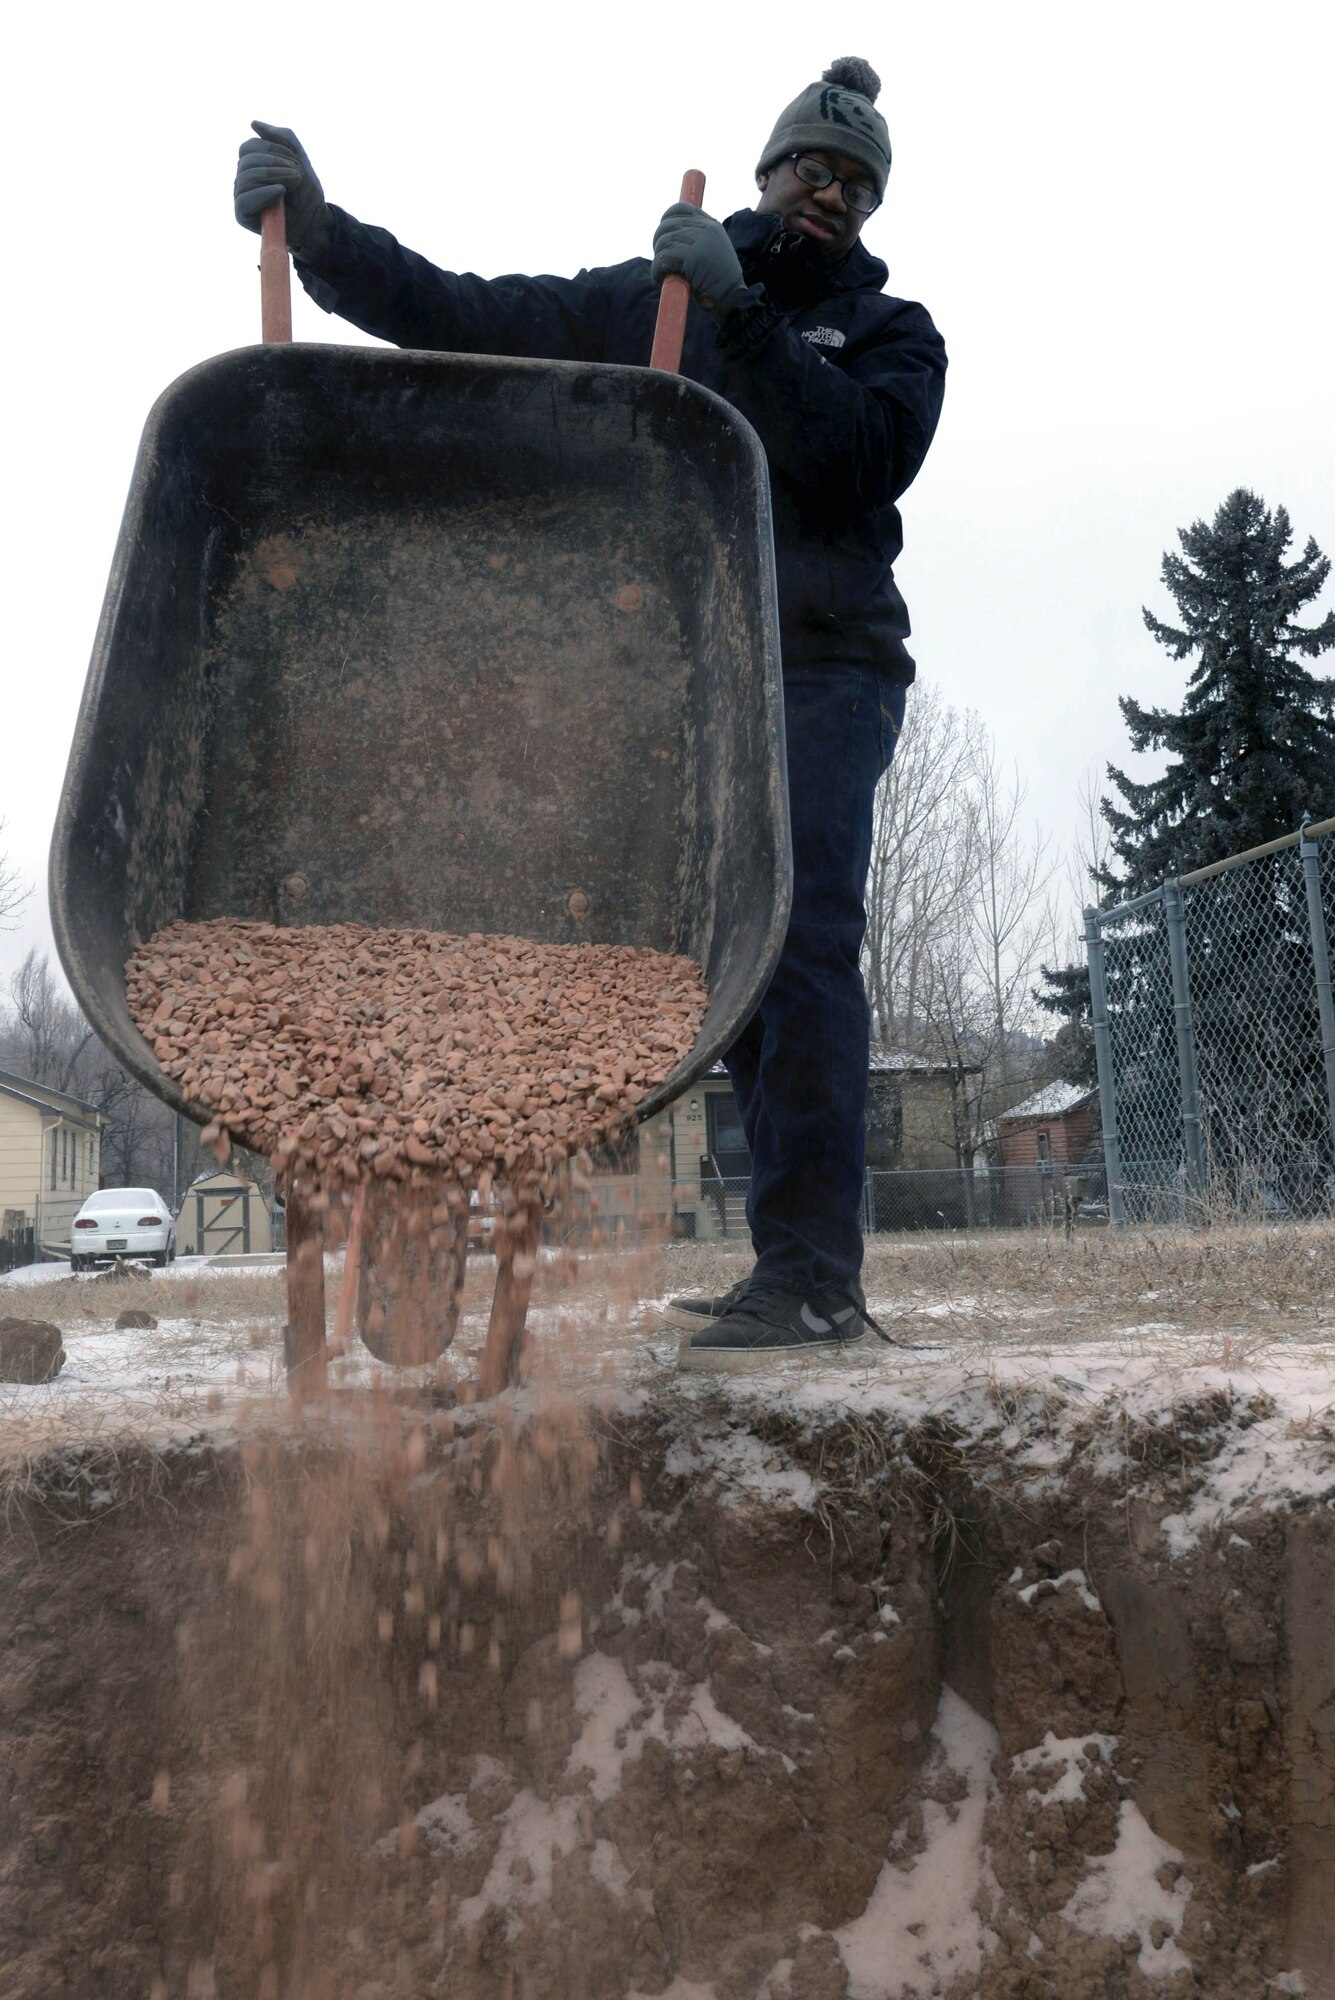 Senior Airman Shaquille Robinson, an intel analyst assigned to the 89th Attack Squadron, pours gravel next to a housing foundation to support its piping in Rapid City, S.D., Dec. 10, 2016. Piping installed in uncompacted ground can develop negative pitch causing stress on the pipe, laying the pipe on a gravel bed will resolve the issue. (U.S. Air Force photo by Airman 1st Class Donald C. Knechtel)